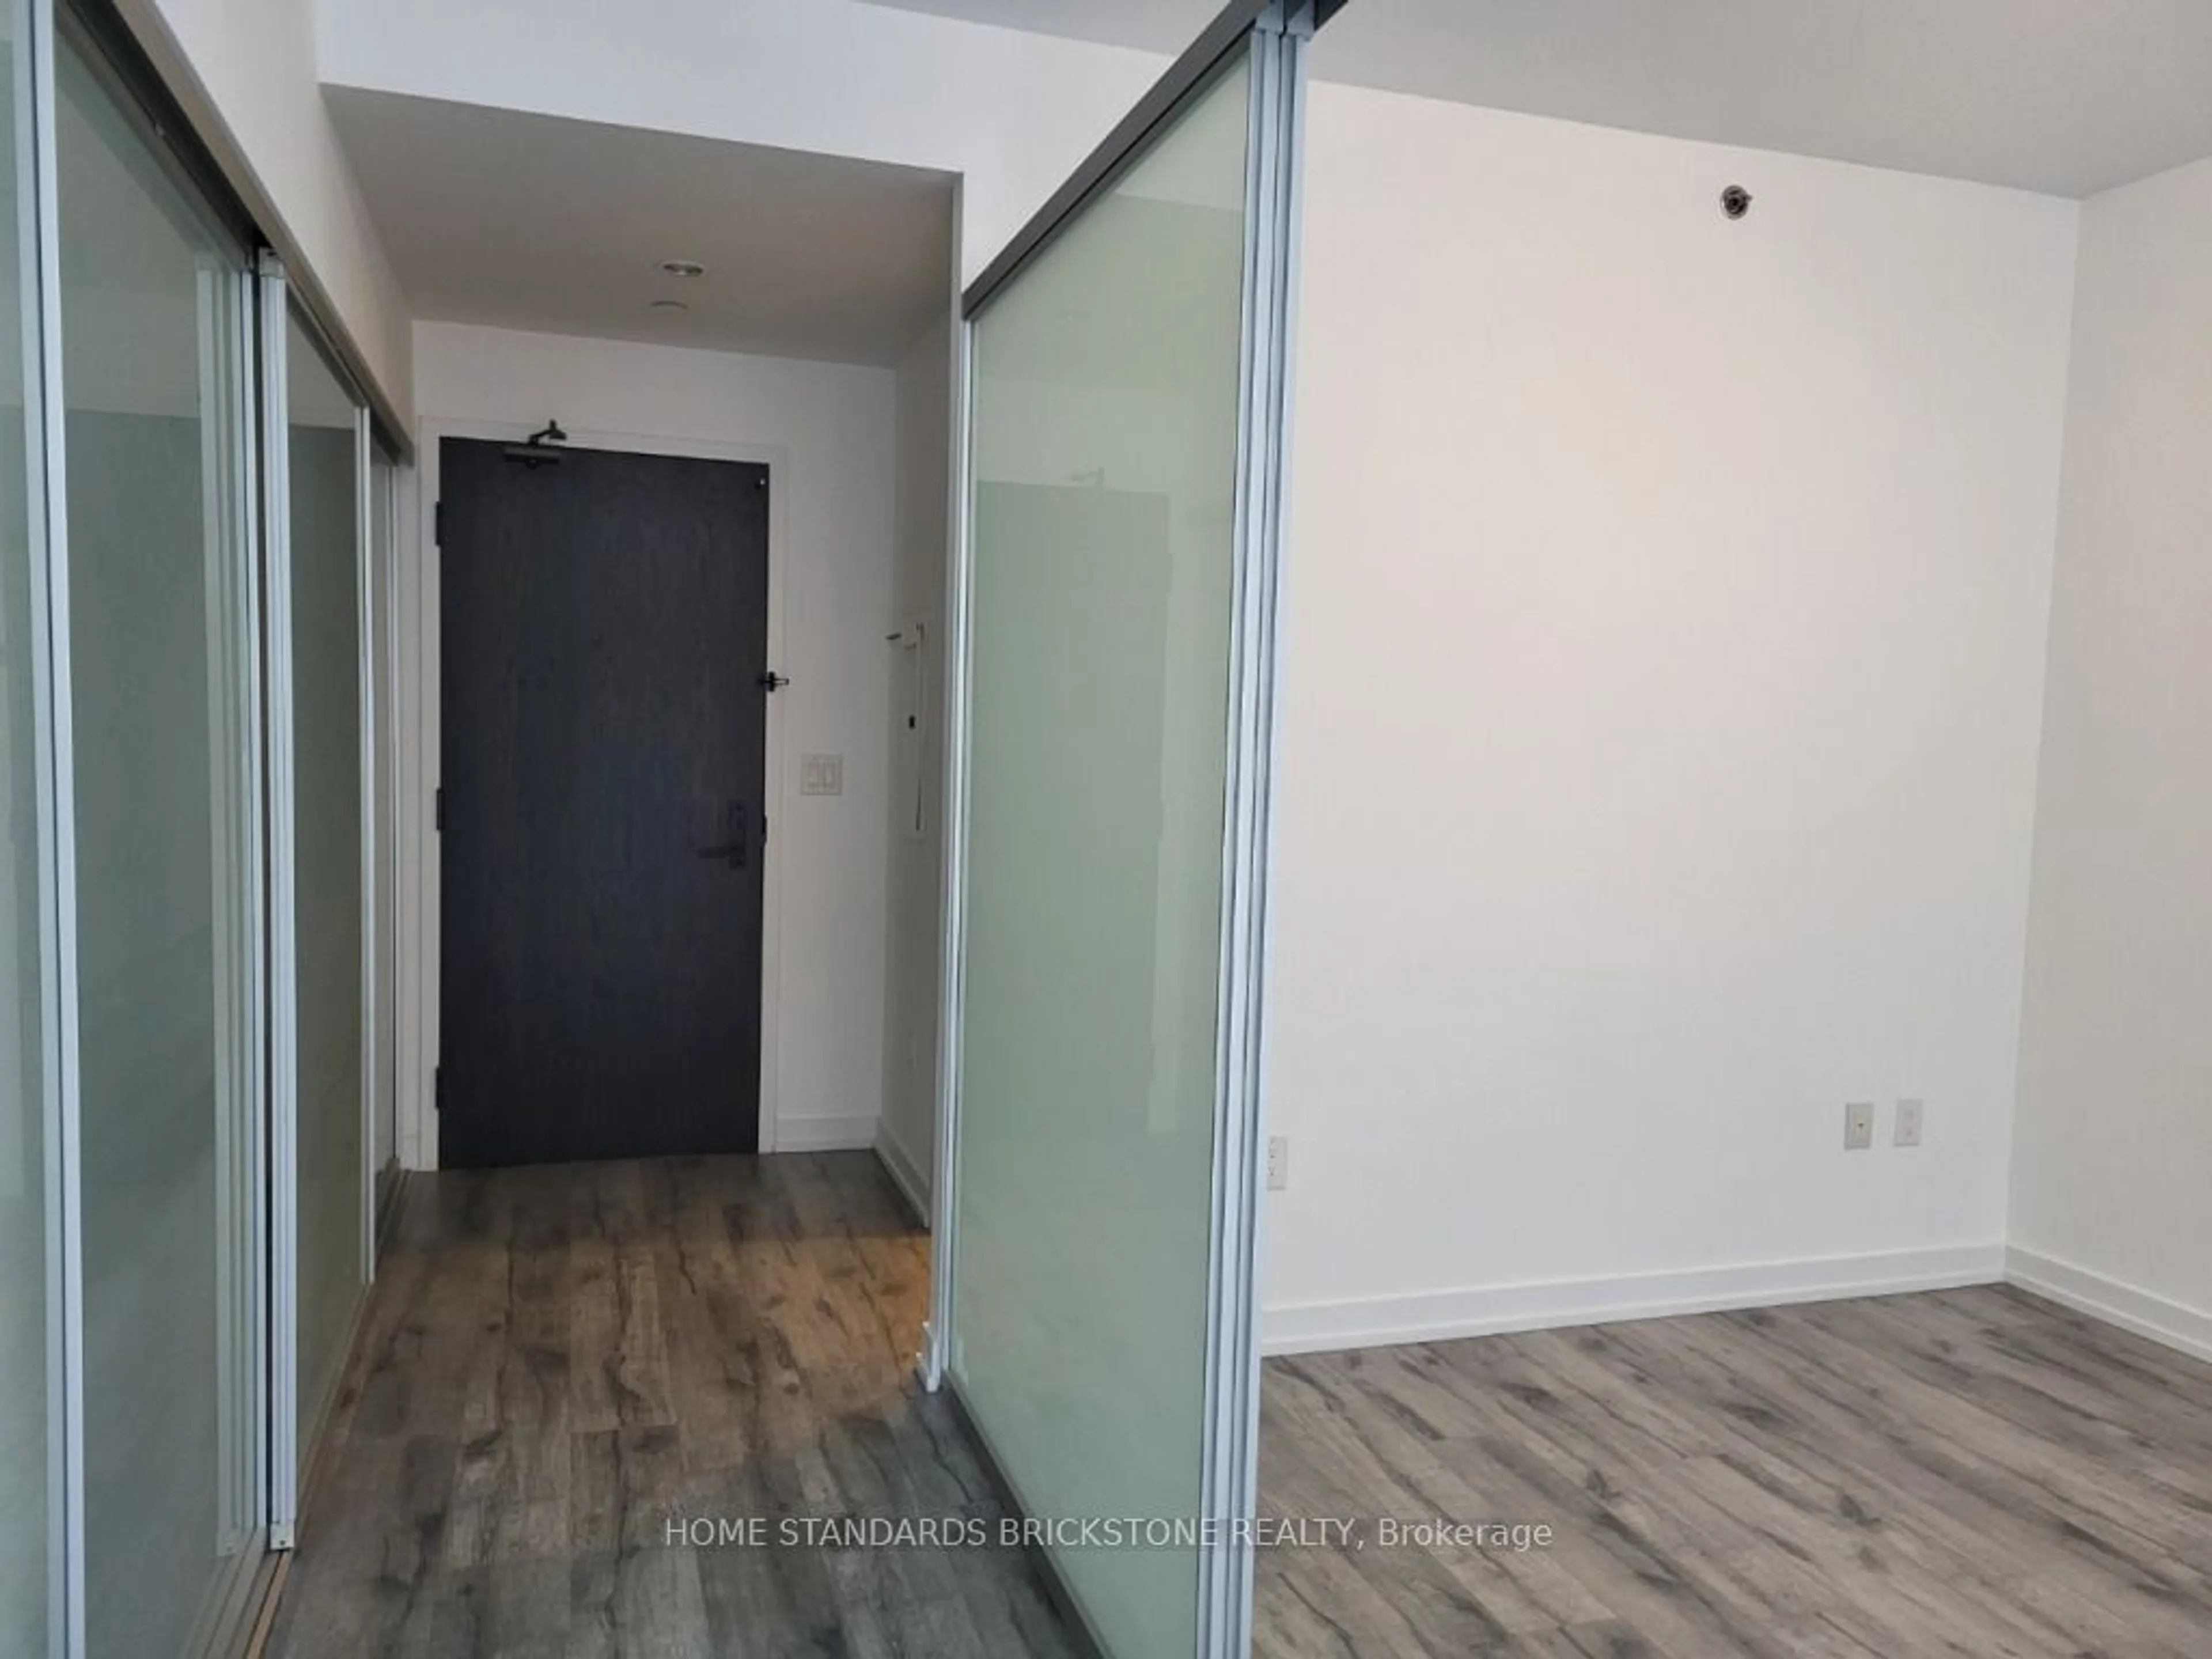 Other indoor space for 426 University Ave #3306, Toronto Ontario M5G 1S9